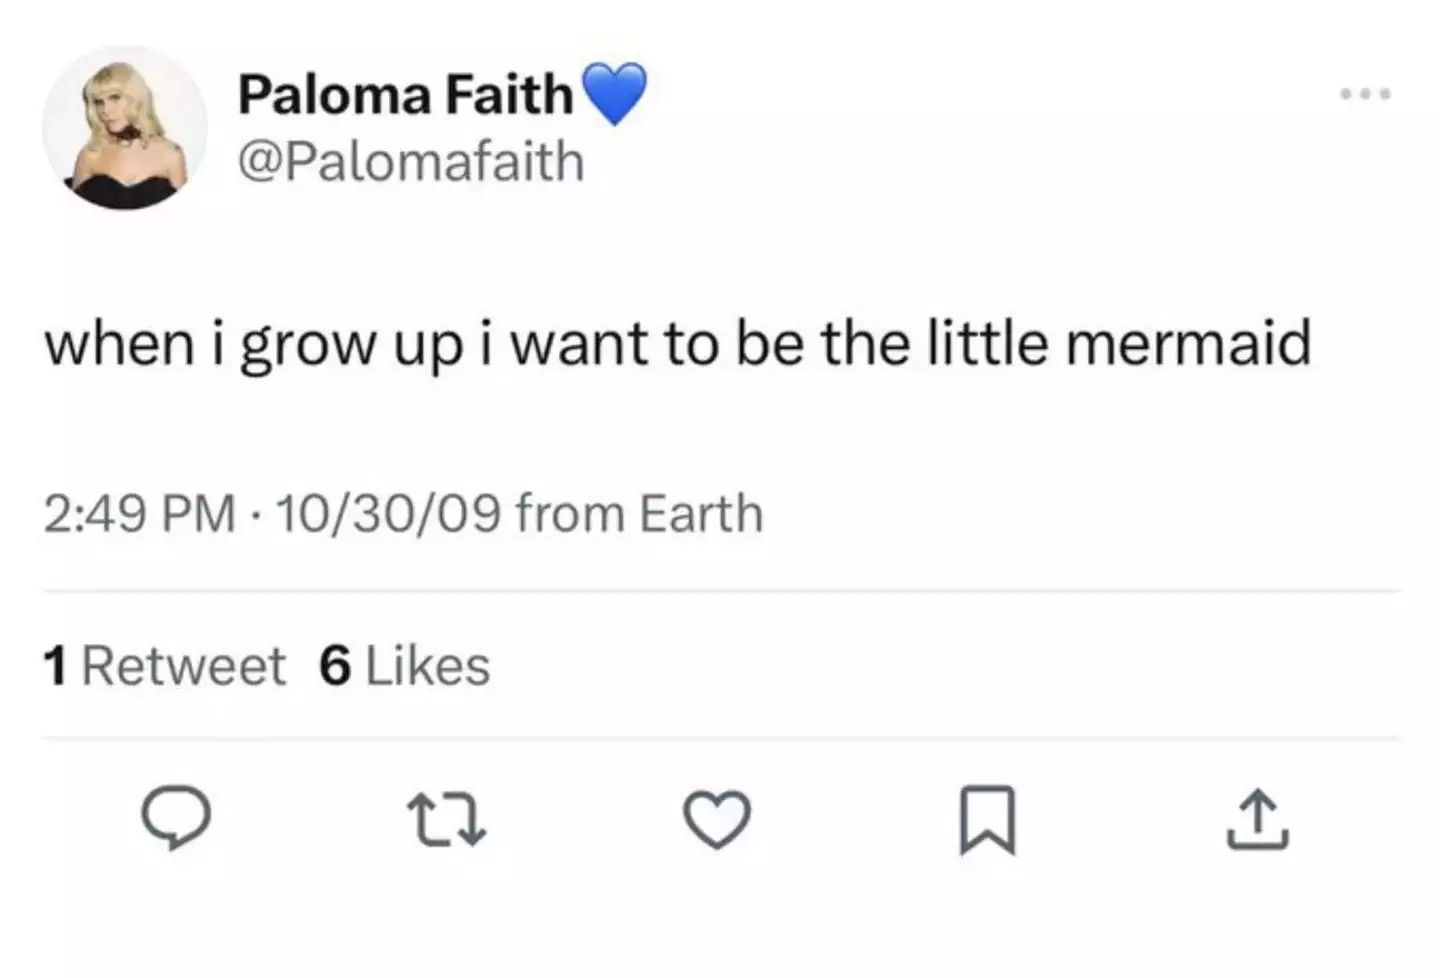 Alas, one of Faith's old tweets came back to bite her in the bum.